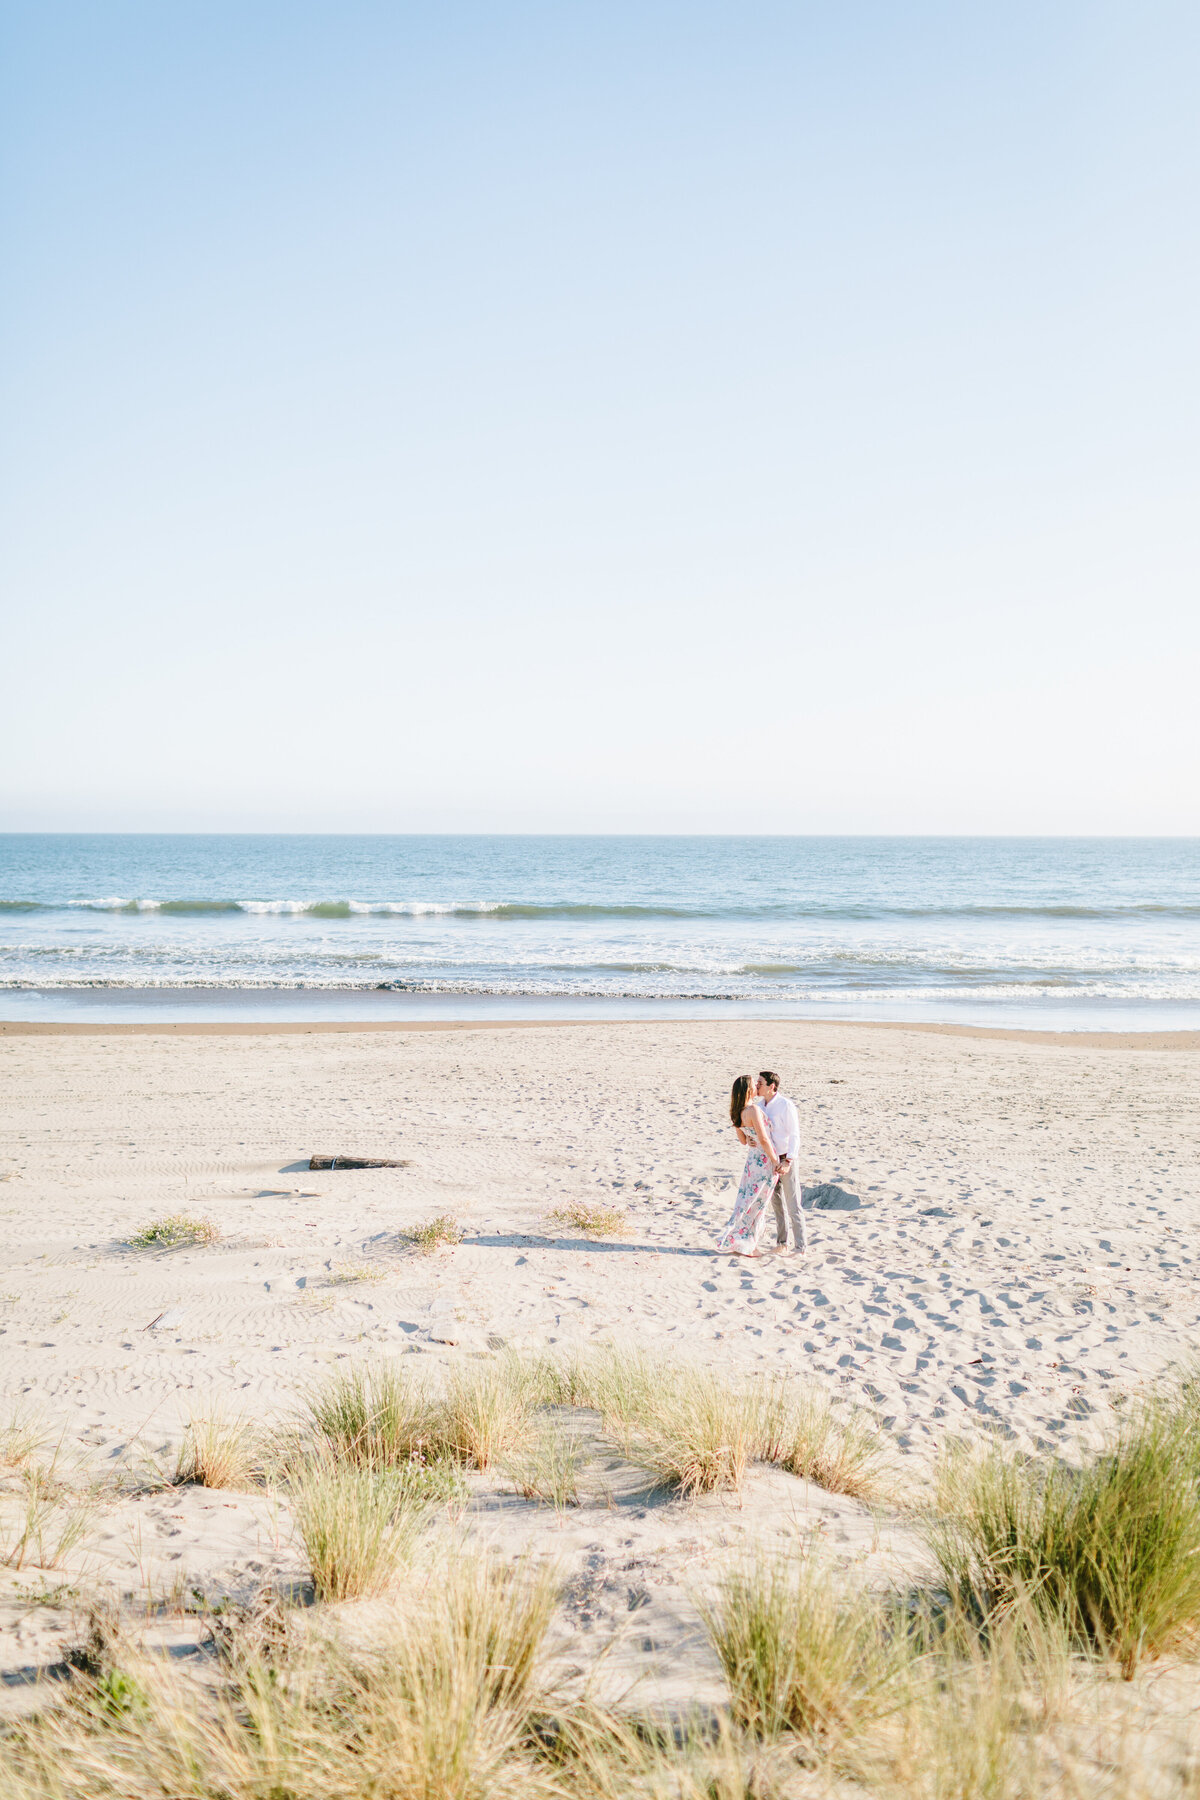 Best California and Texas Engagement Photos-Jodee Friday & Co-165